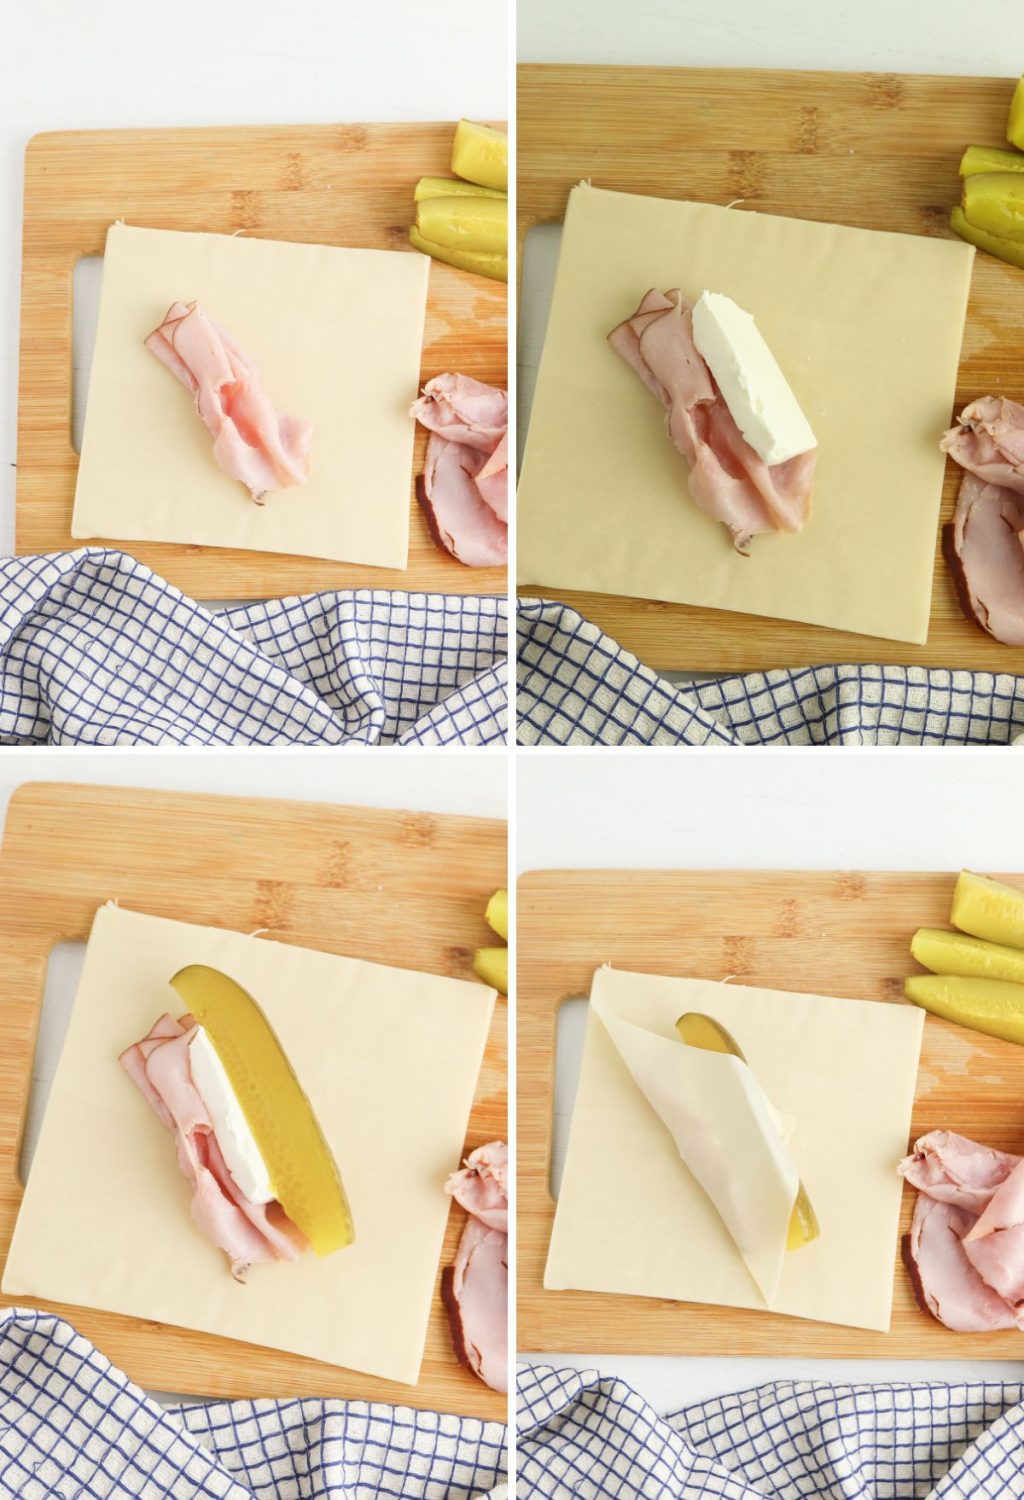 Four pictures showing how to make ham and cheese on a cutting board.